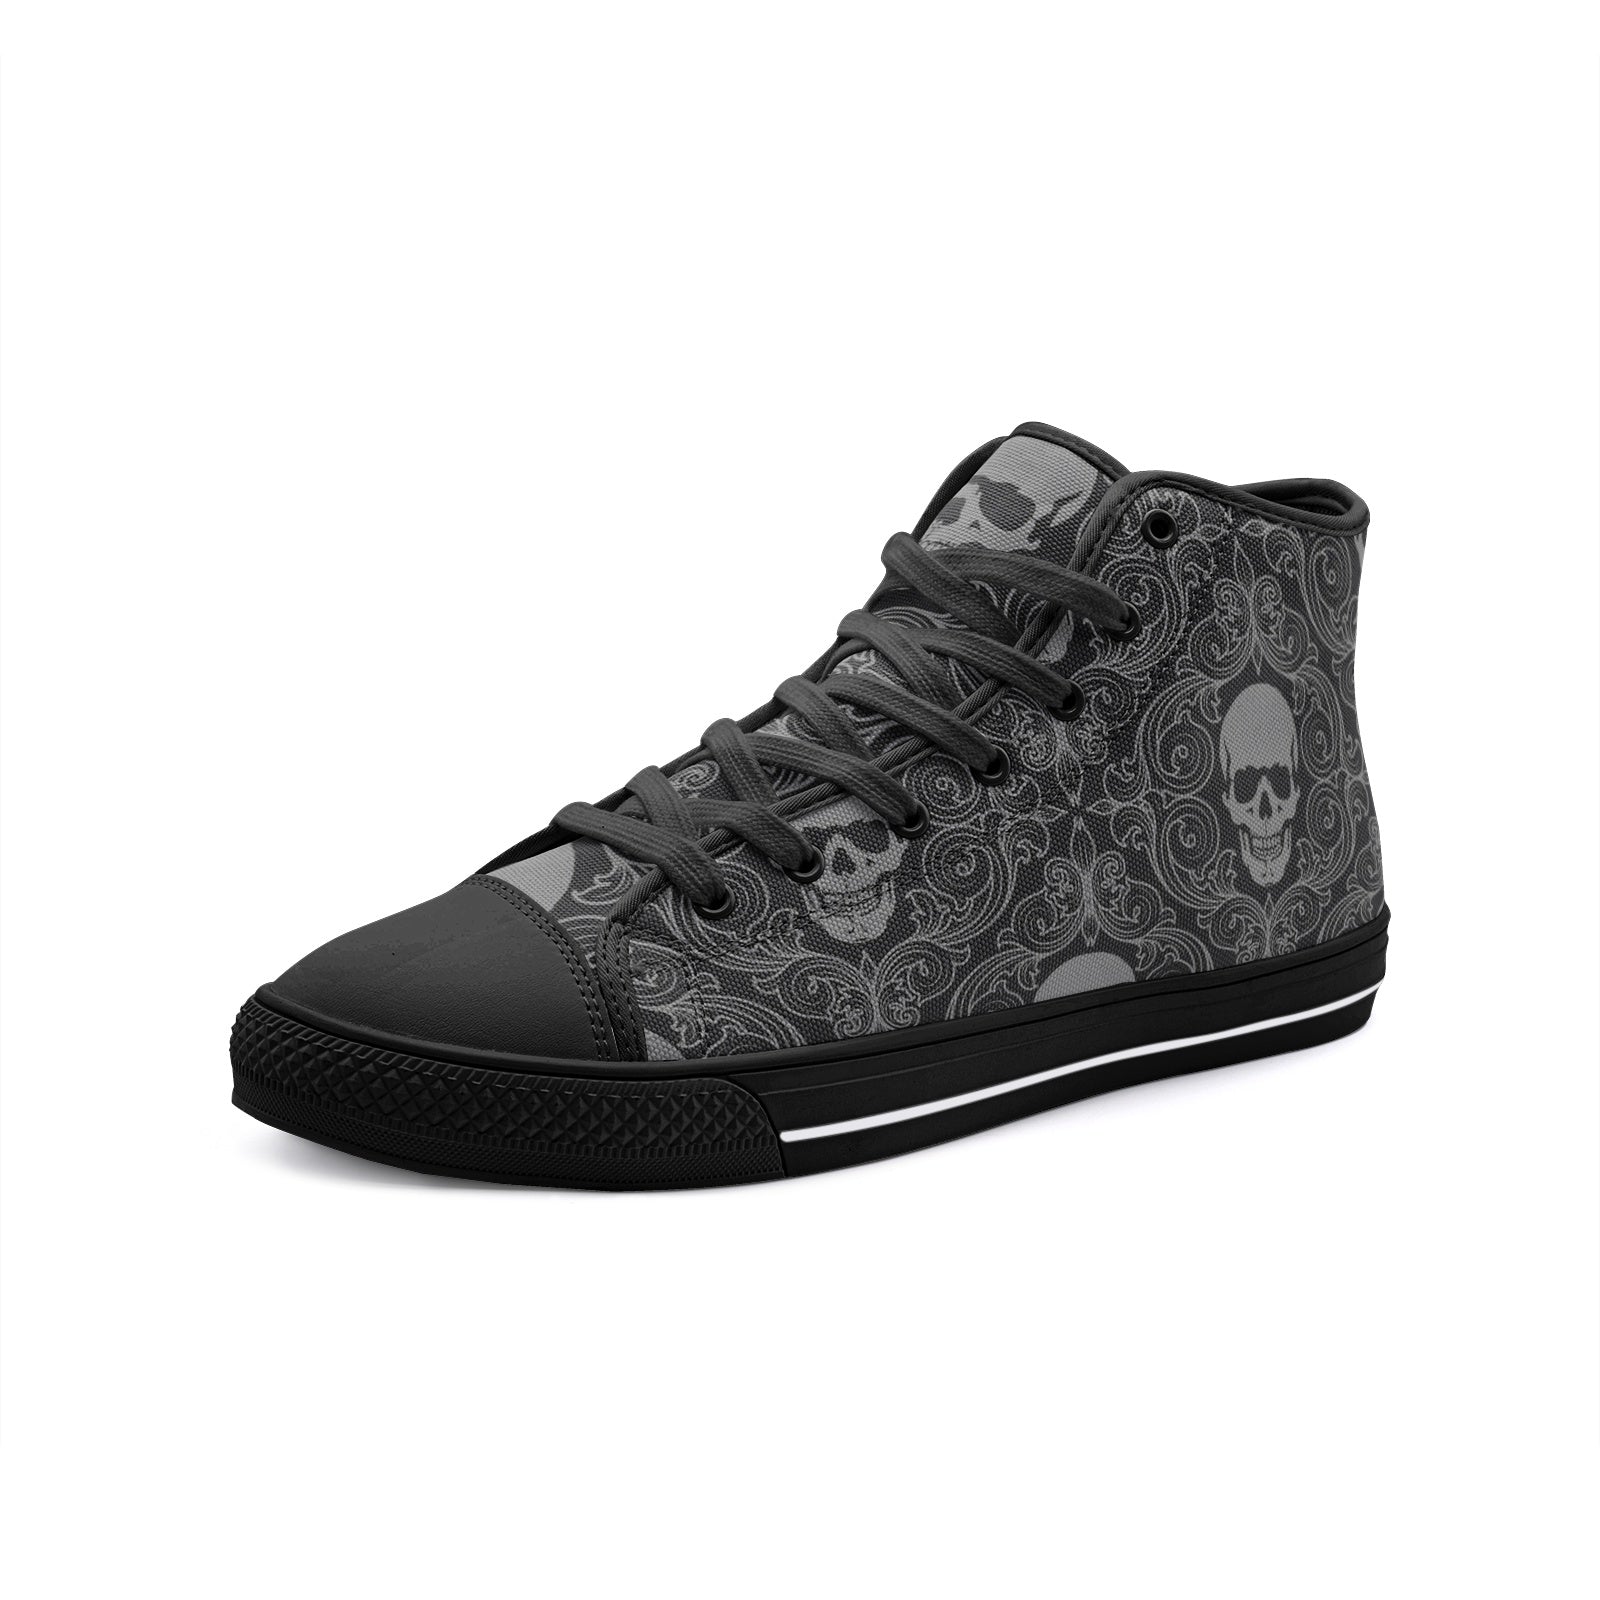 Creative Skull Unisex High Top Canvas Shoes